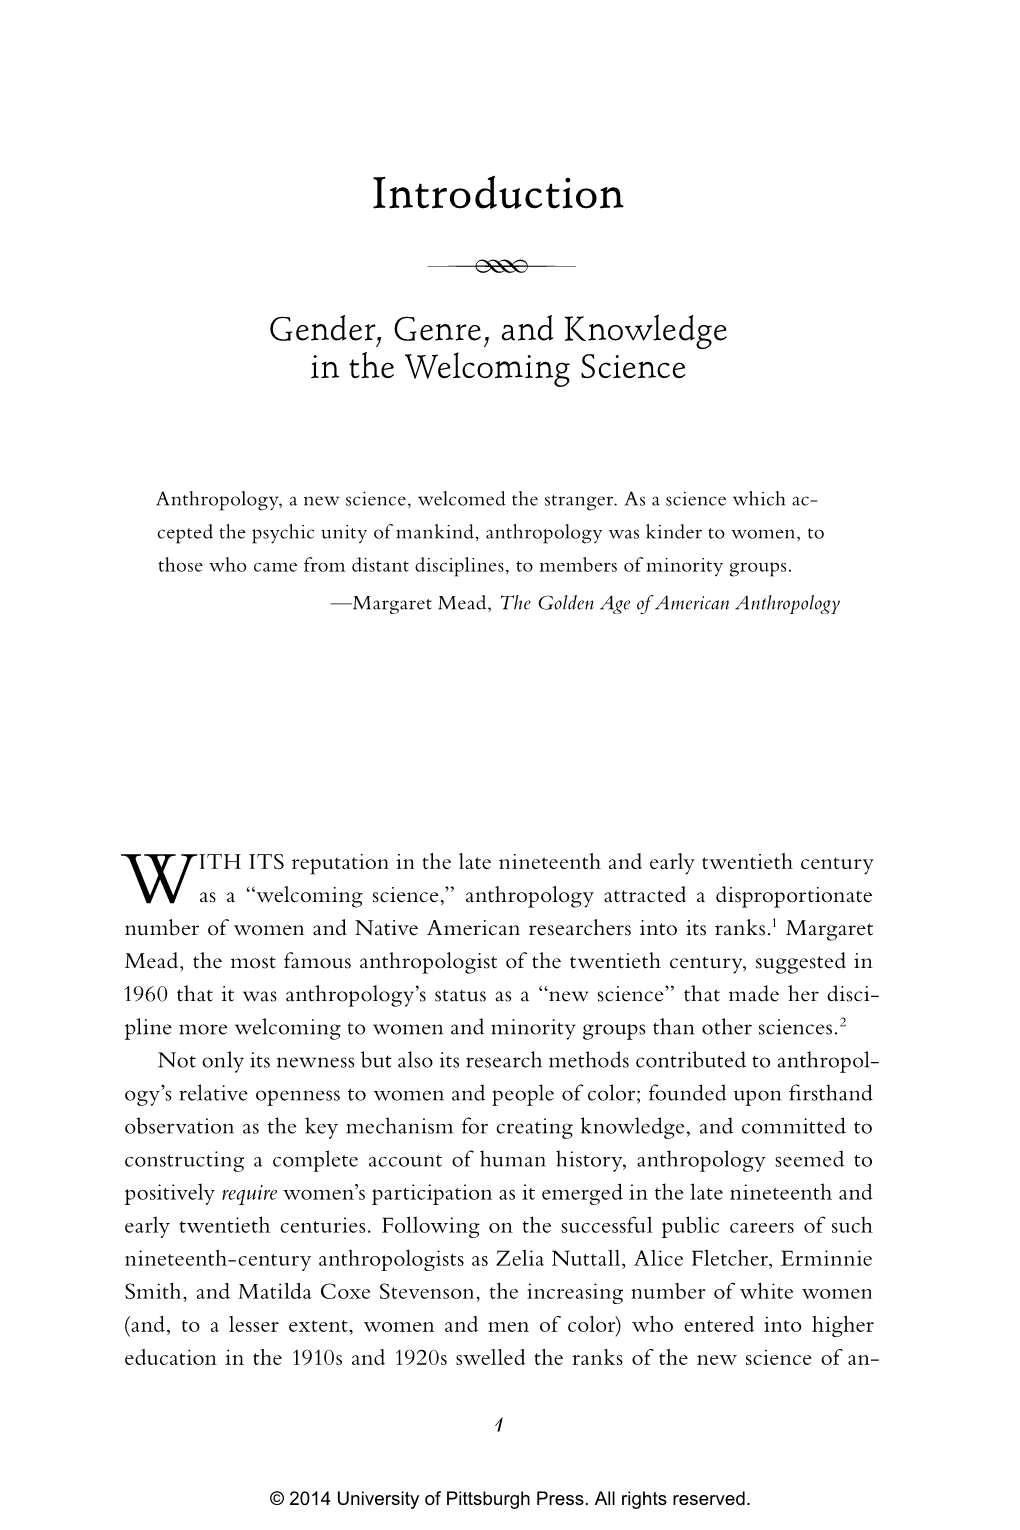 Introduction R Gender, Genre, and Knowledge in the Welcoming Science